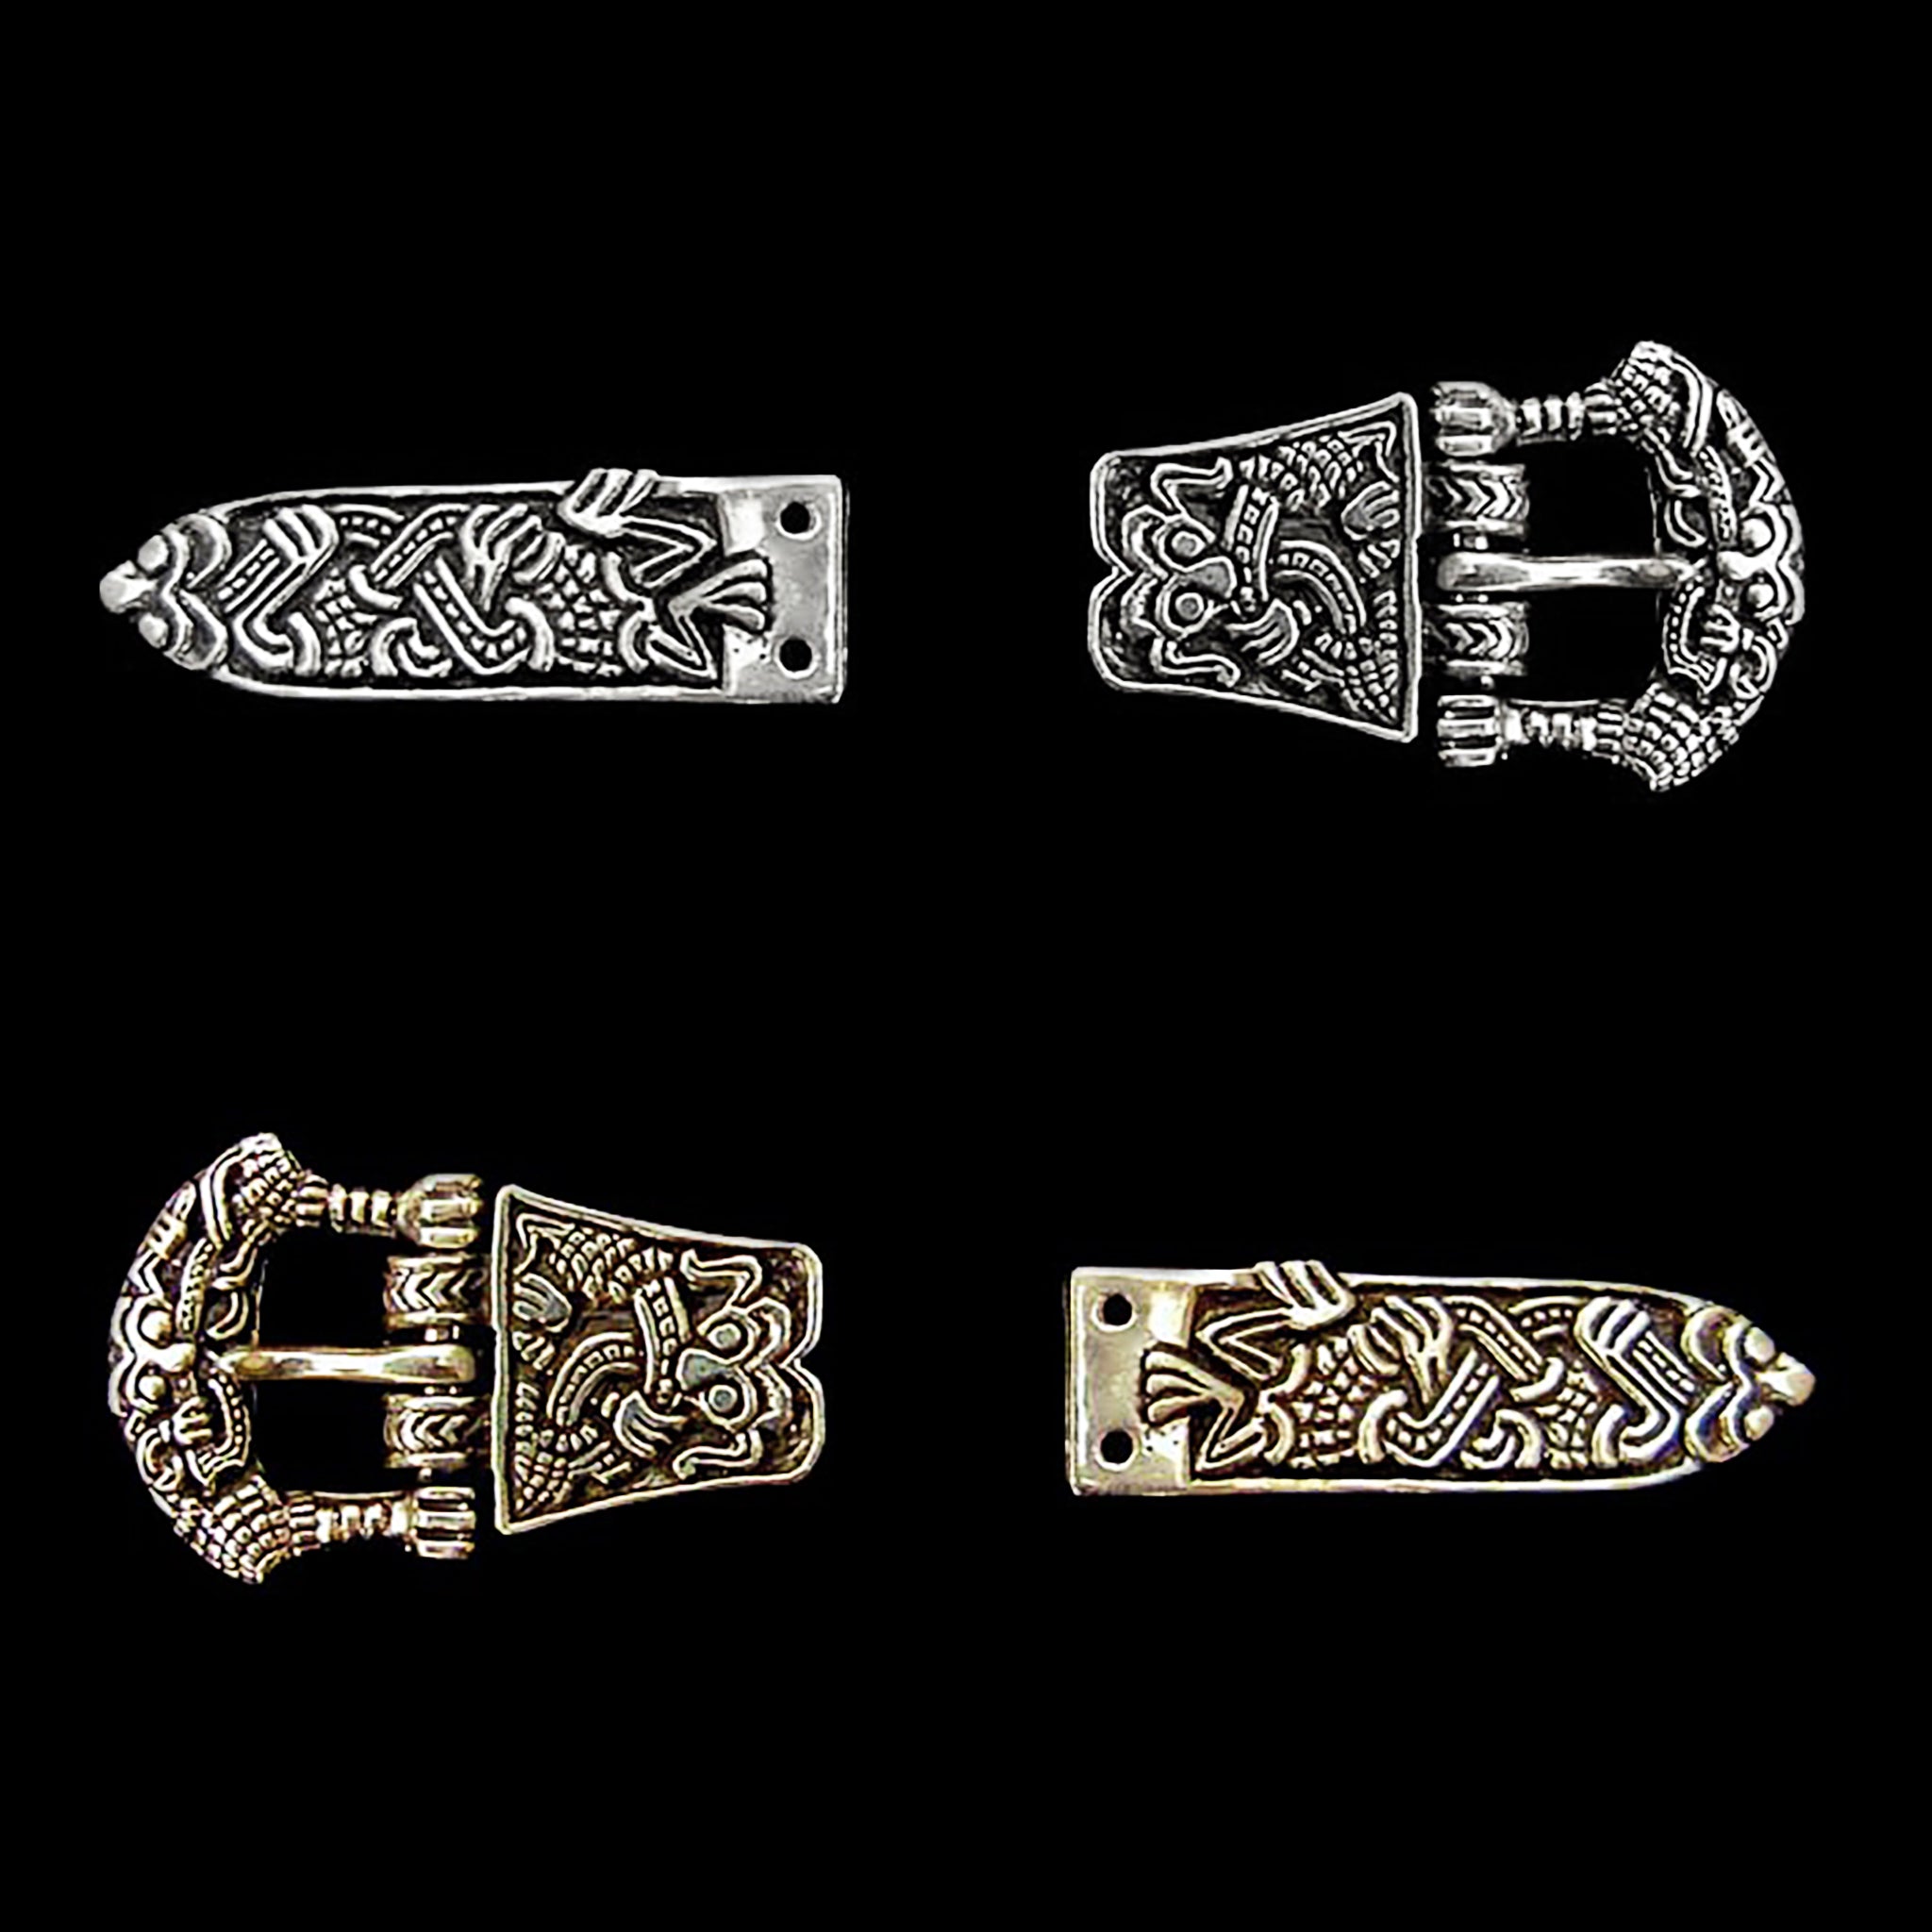 Gripping Beast Viking Belt Fittings in Silver and Bronze